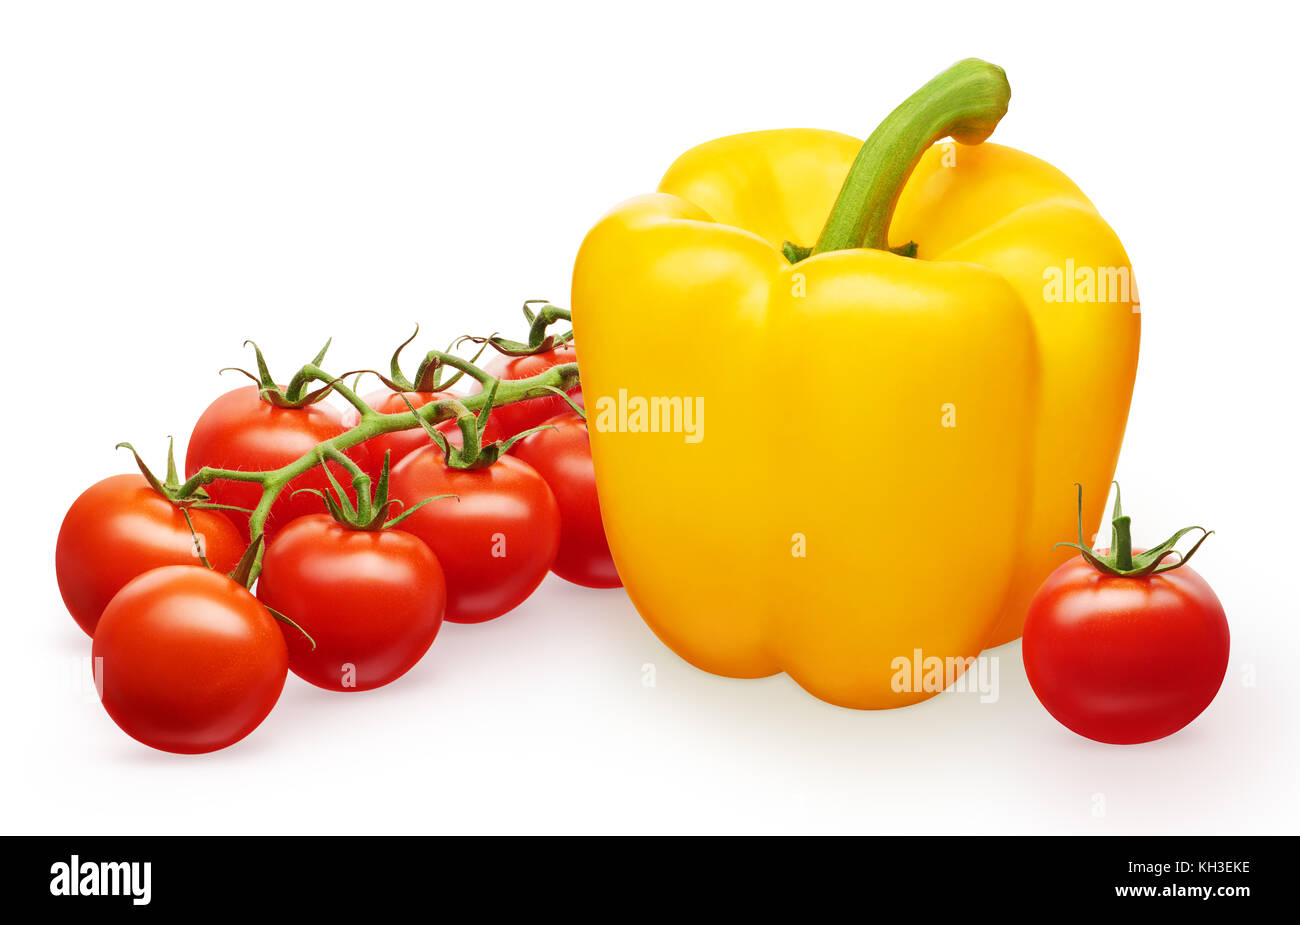 Whole fresh yellow bell pepper, branch of red cherry tomatoes with green leaves and single tomato isolated on white background Stock Photo